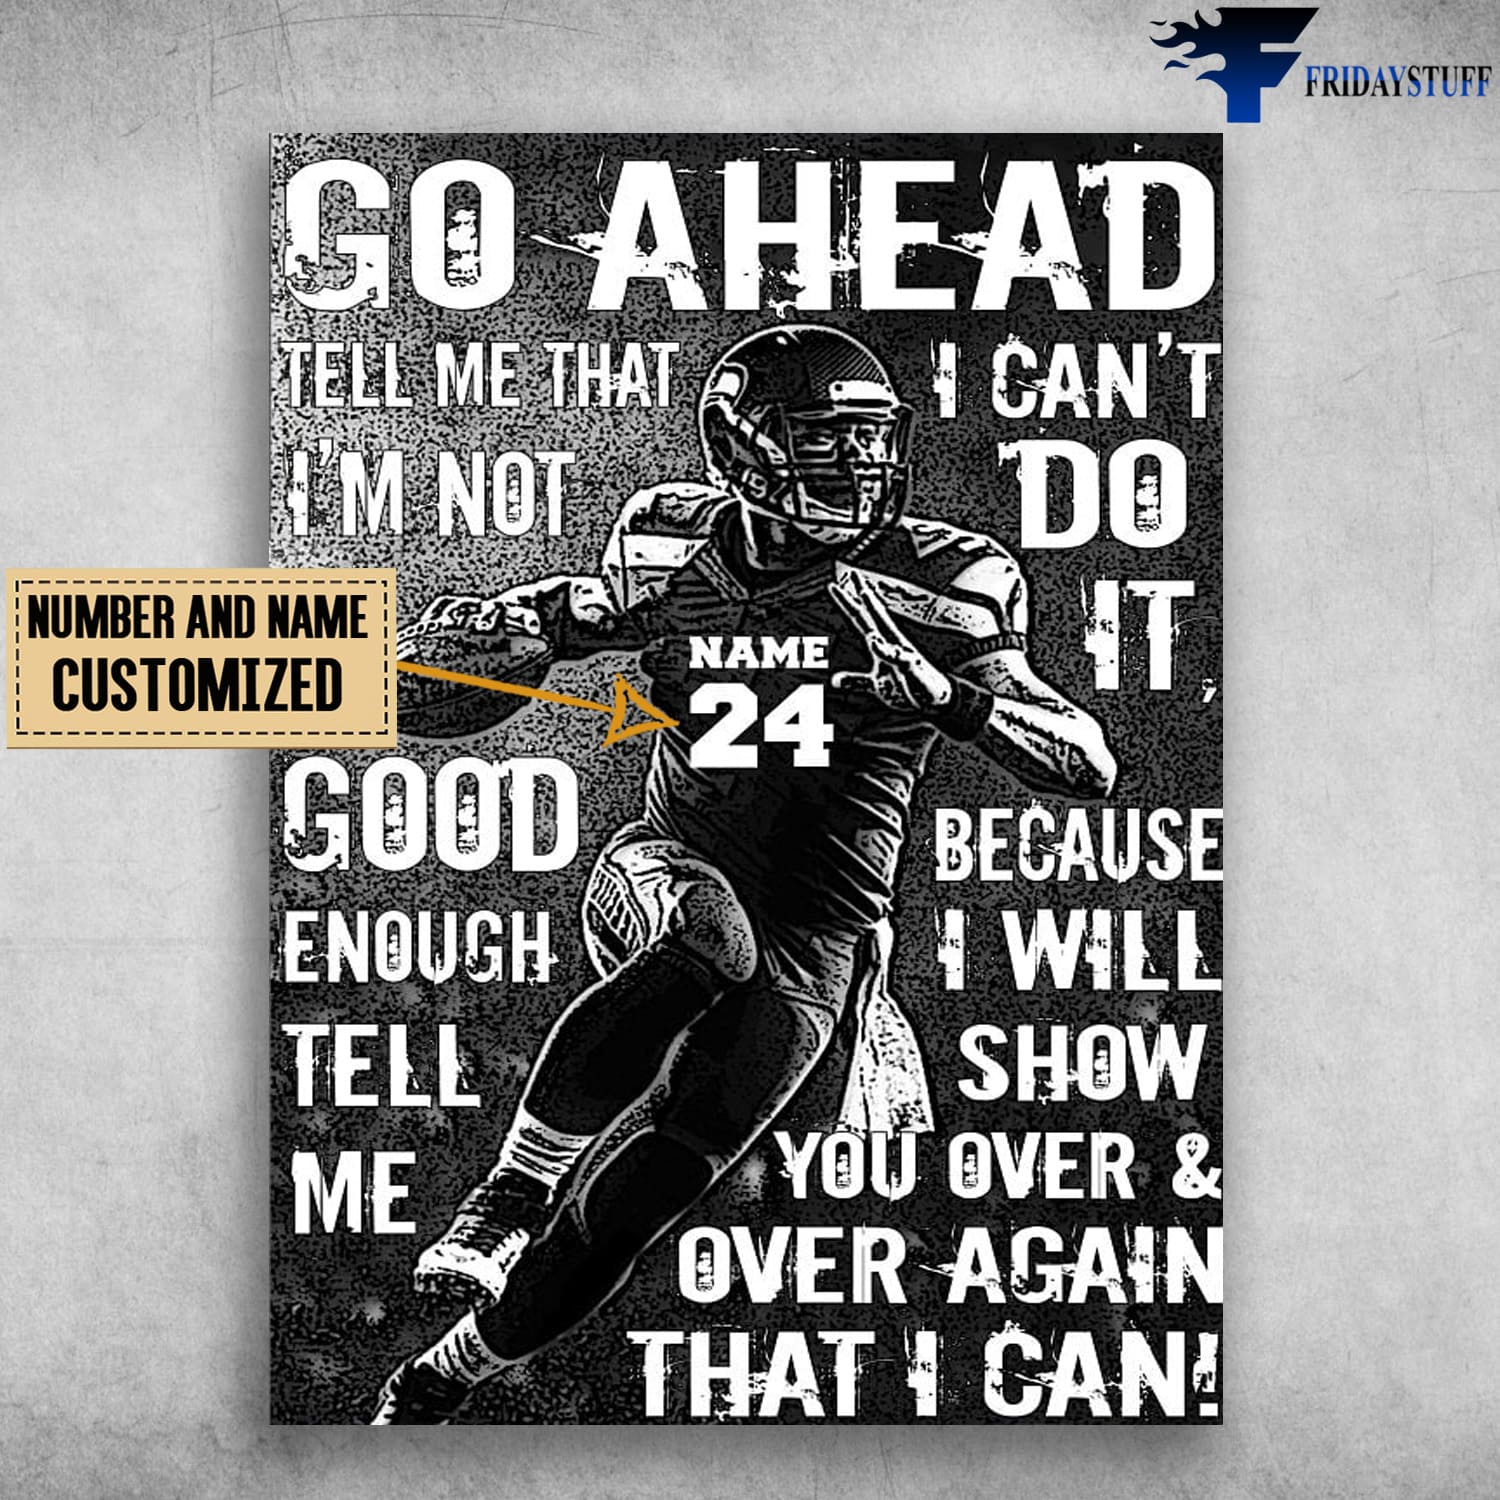 Football Poster, Football Player, Go Ahead, Tell Me That I'm Not, I Can't Do It, Good Enough Teel Me, Because I Will Show You Over, And Over Again, That I Can